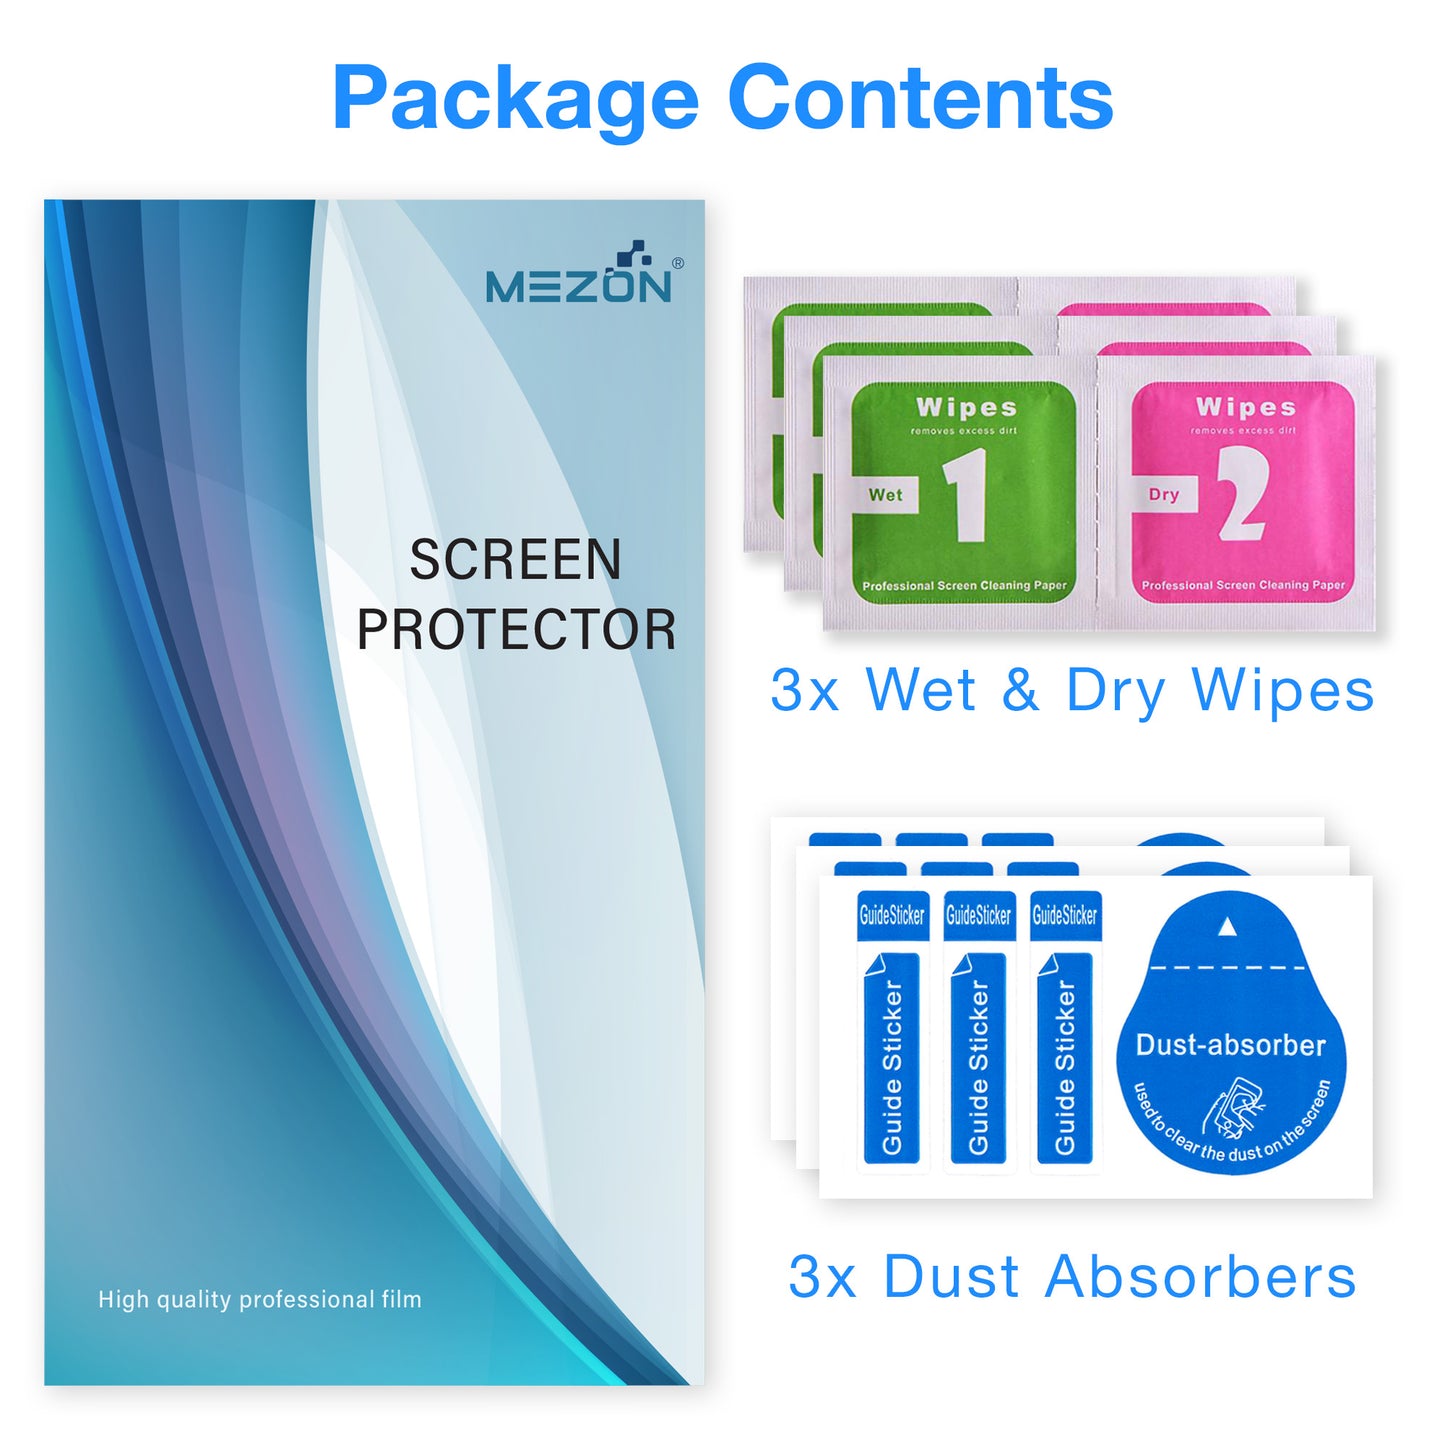 [3 Pack] MEZON Samsung Galaxy S20 Premium Clear Edge-to-Edge Full Coverage Hydrogel Screen Protector Film